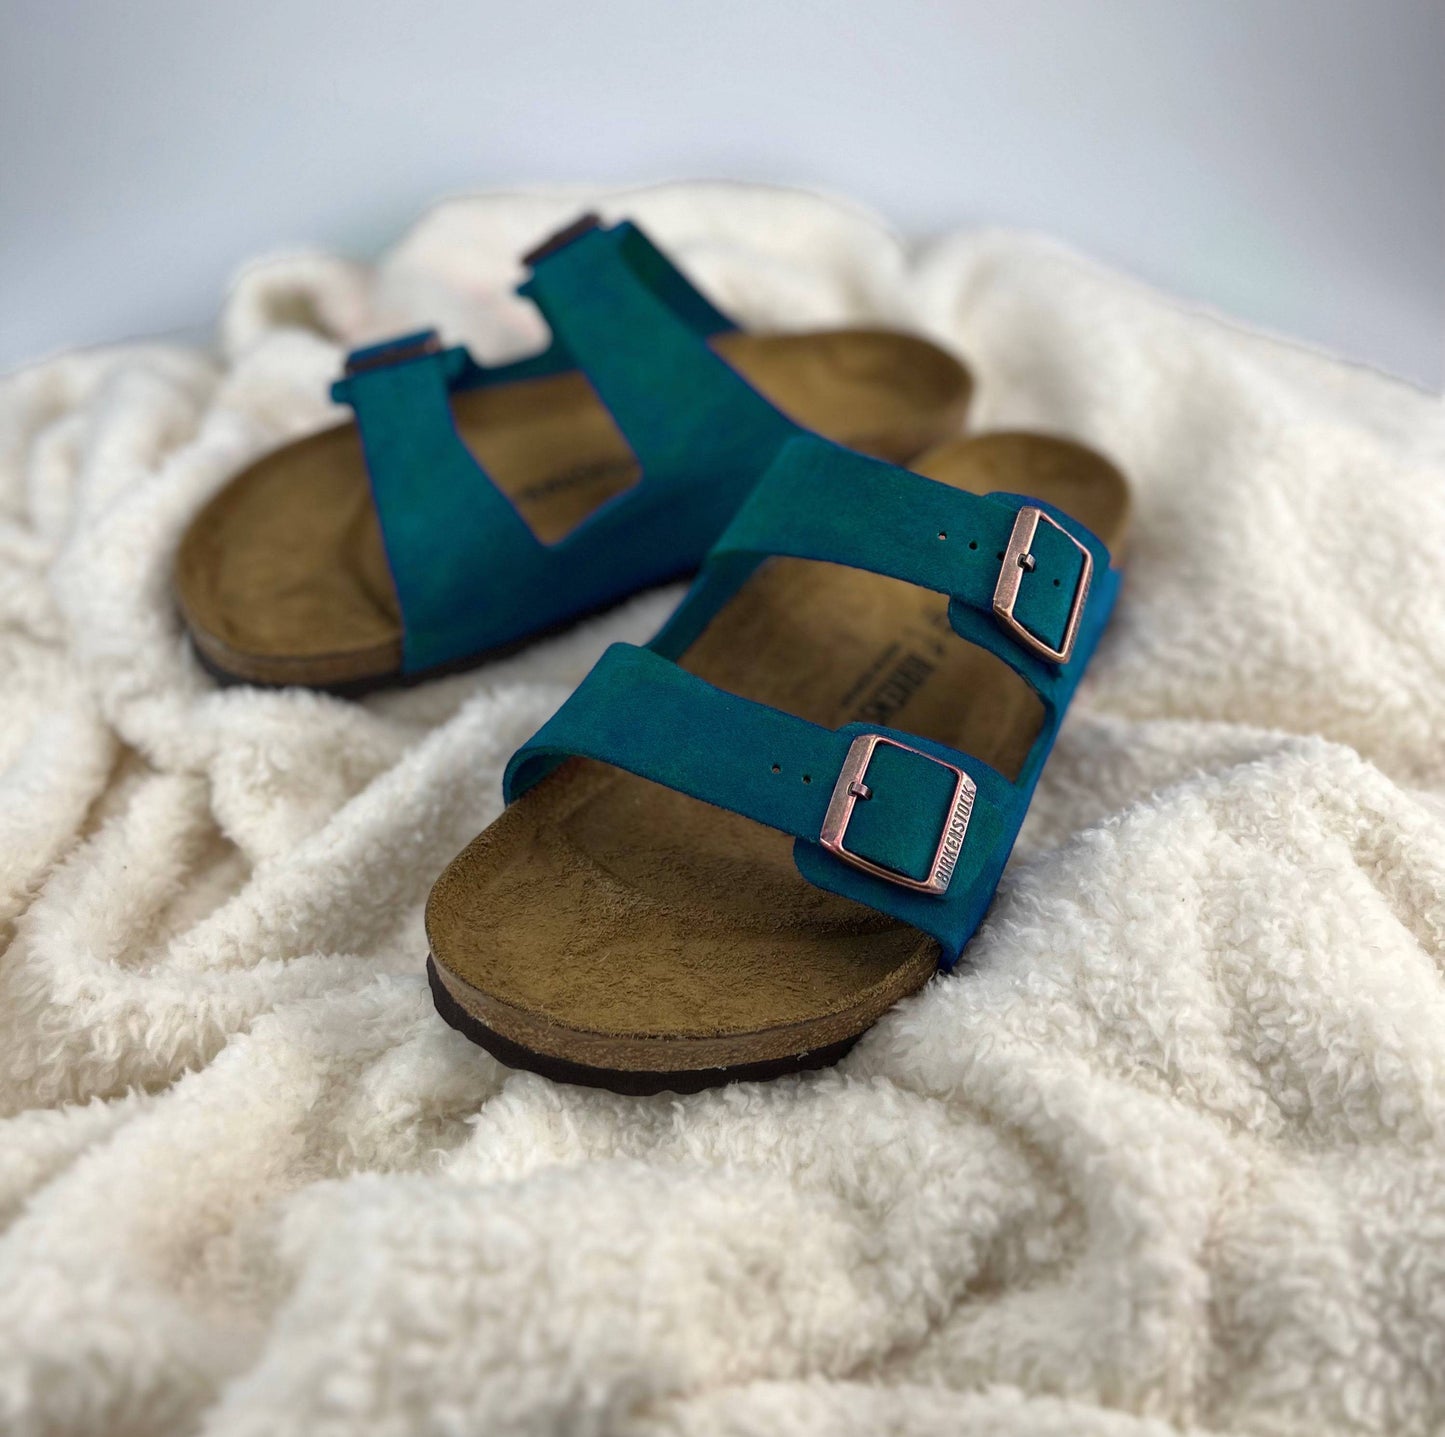 Teal Birkenstock Sandals with 2 straps & copper buckles on a white sherpa blanket